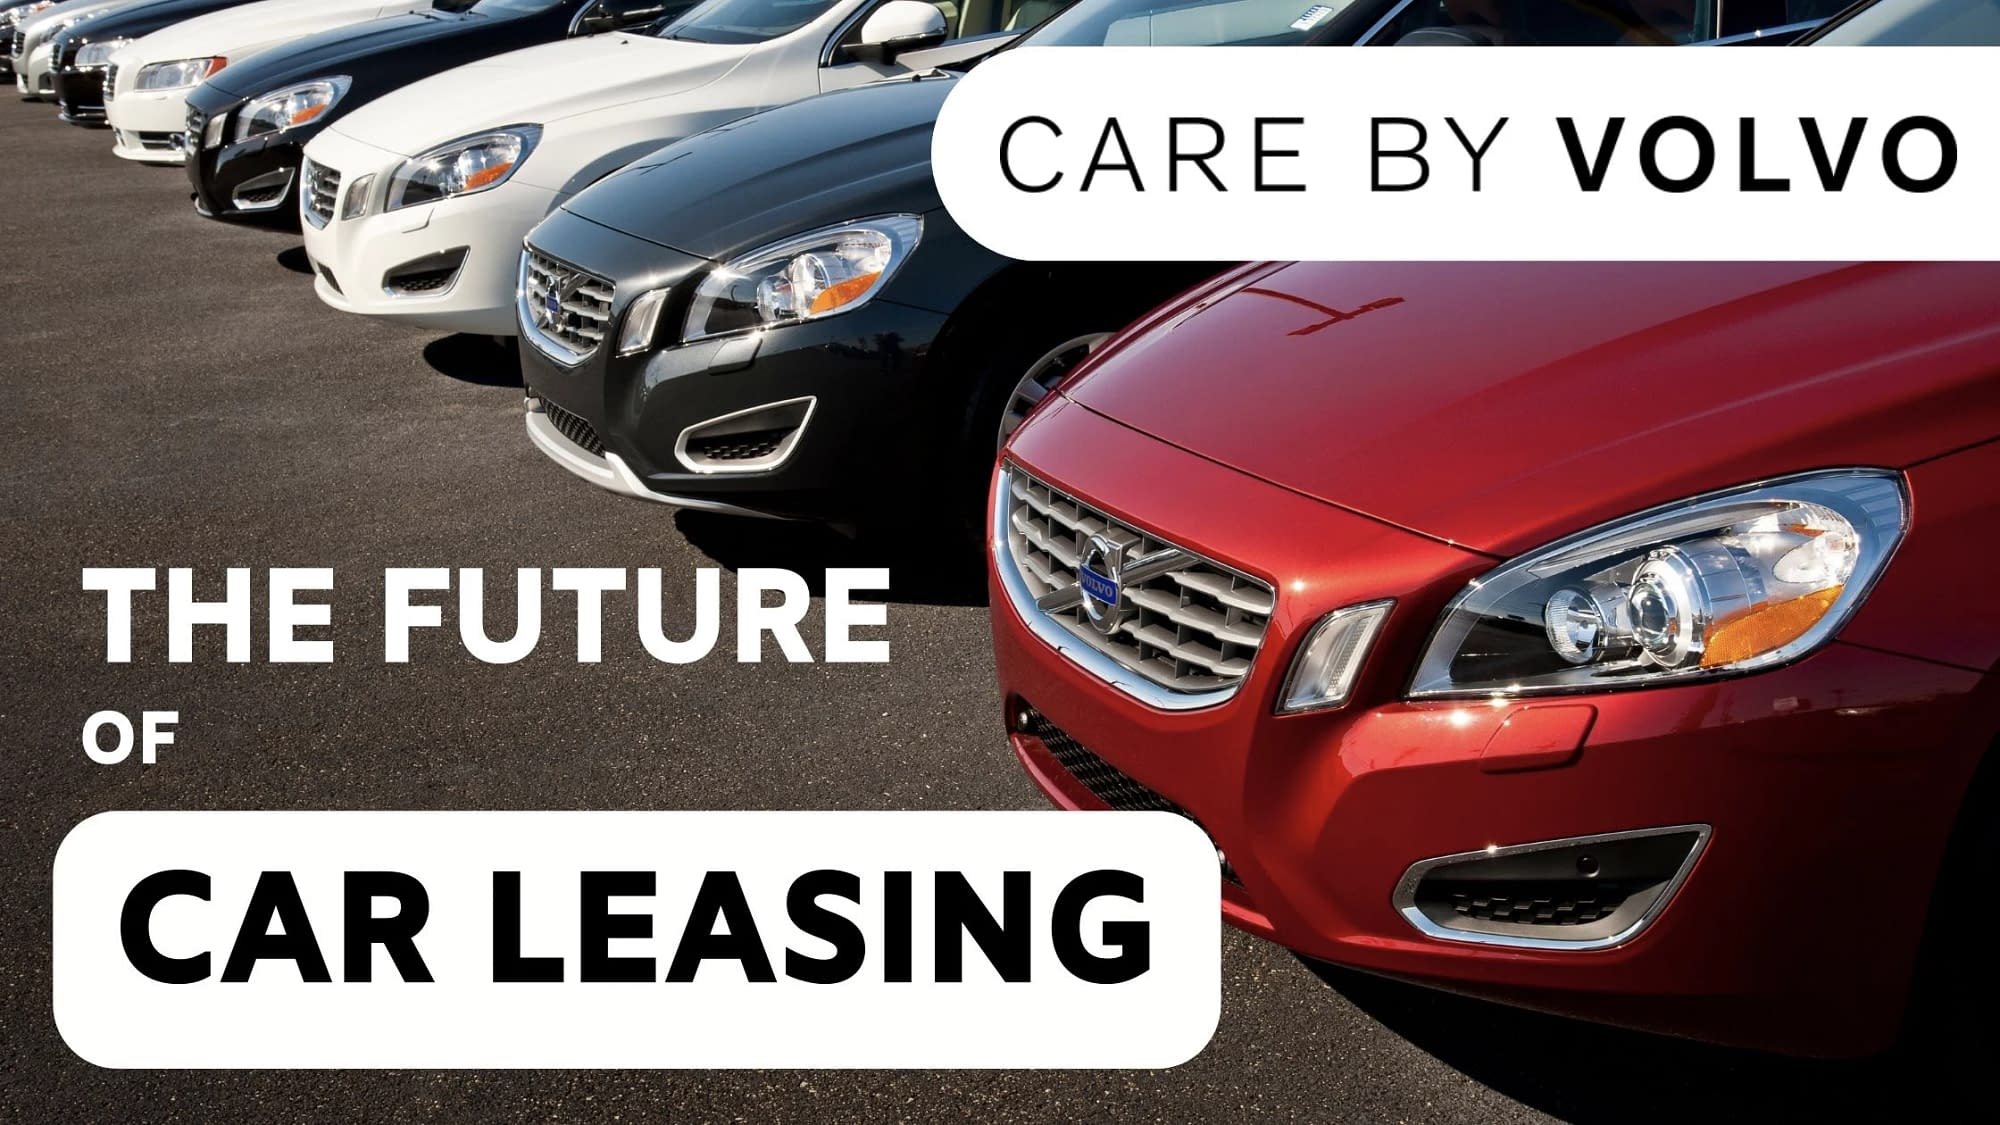 Care by Volvo: The Future of Car Leasing